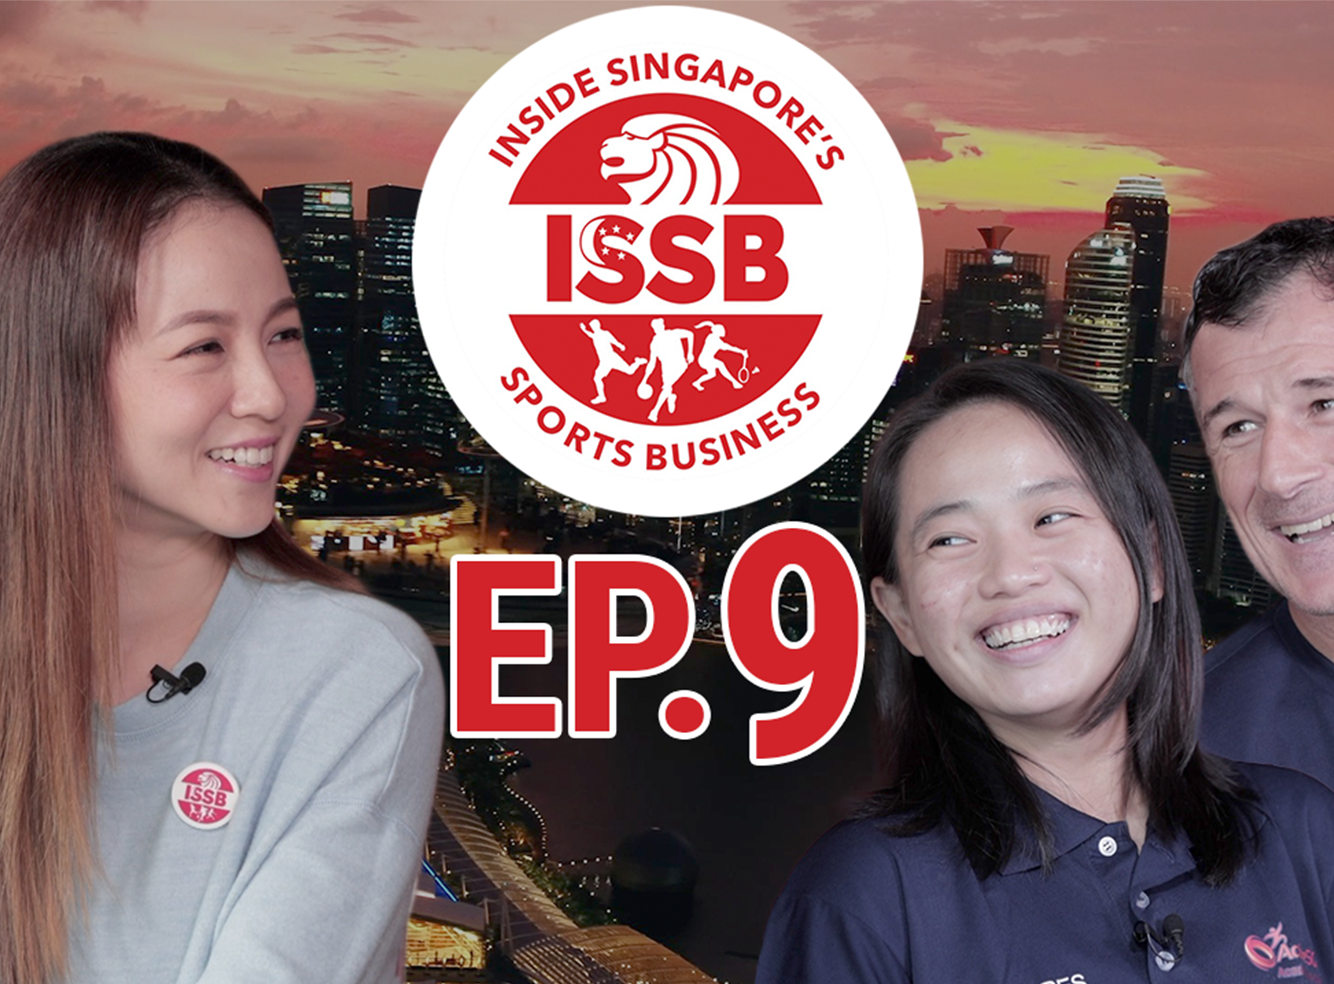 Episode 9 - The Future of the Football Industry in Singapore